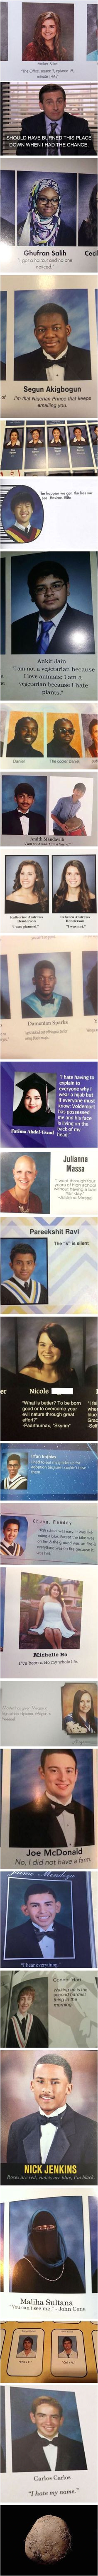 best year books ever